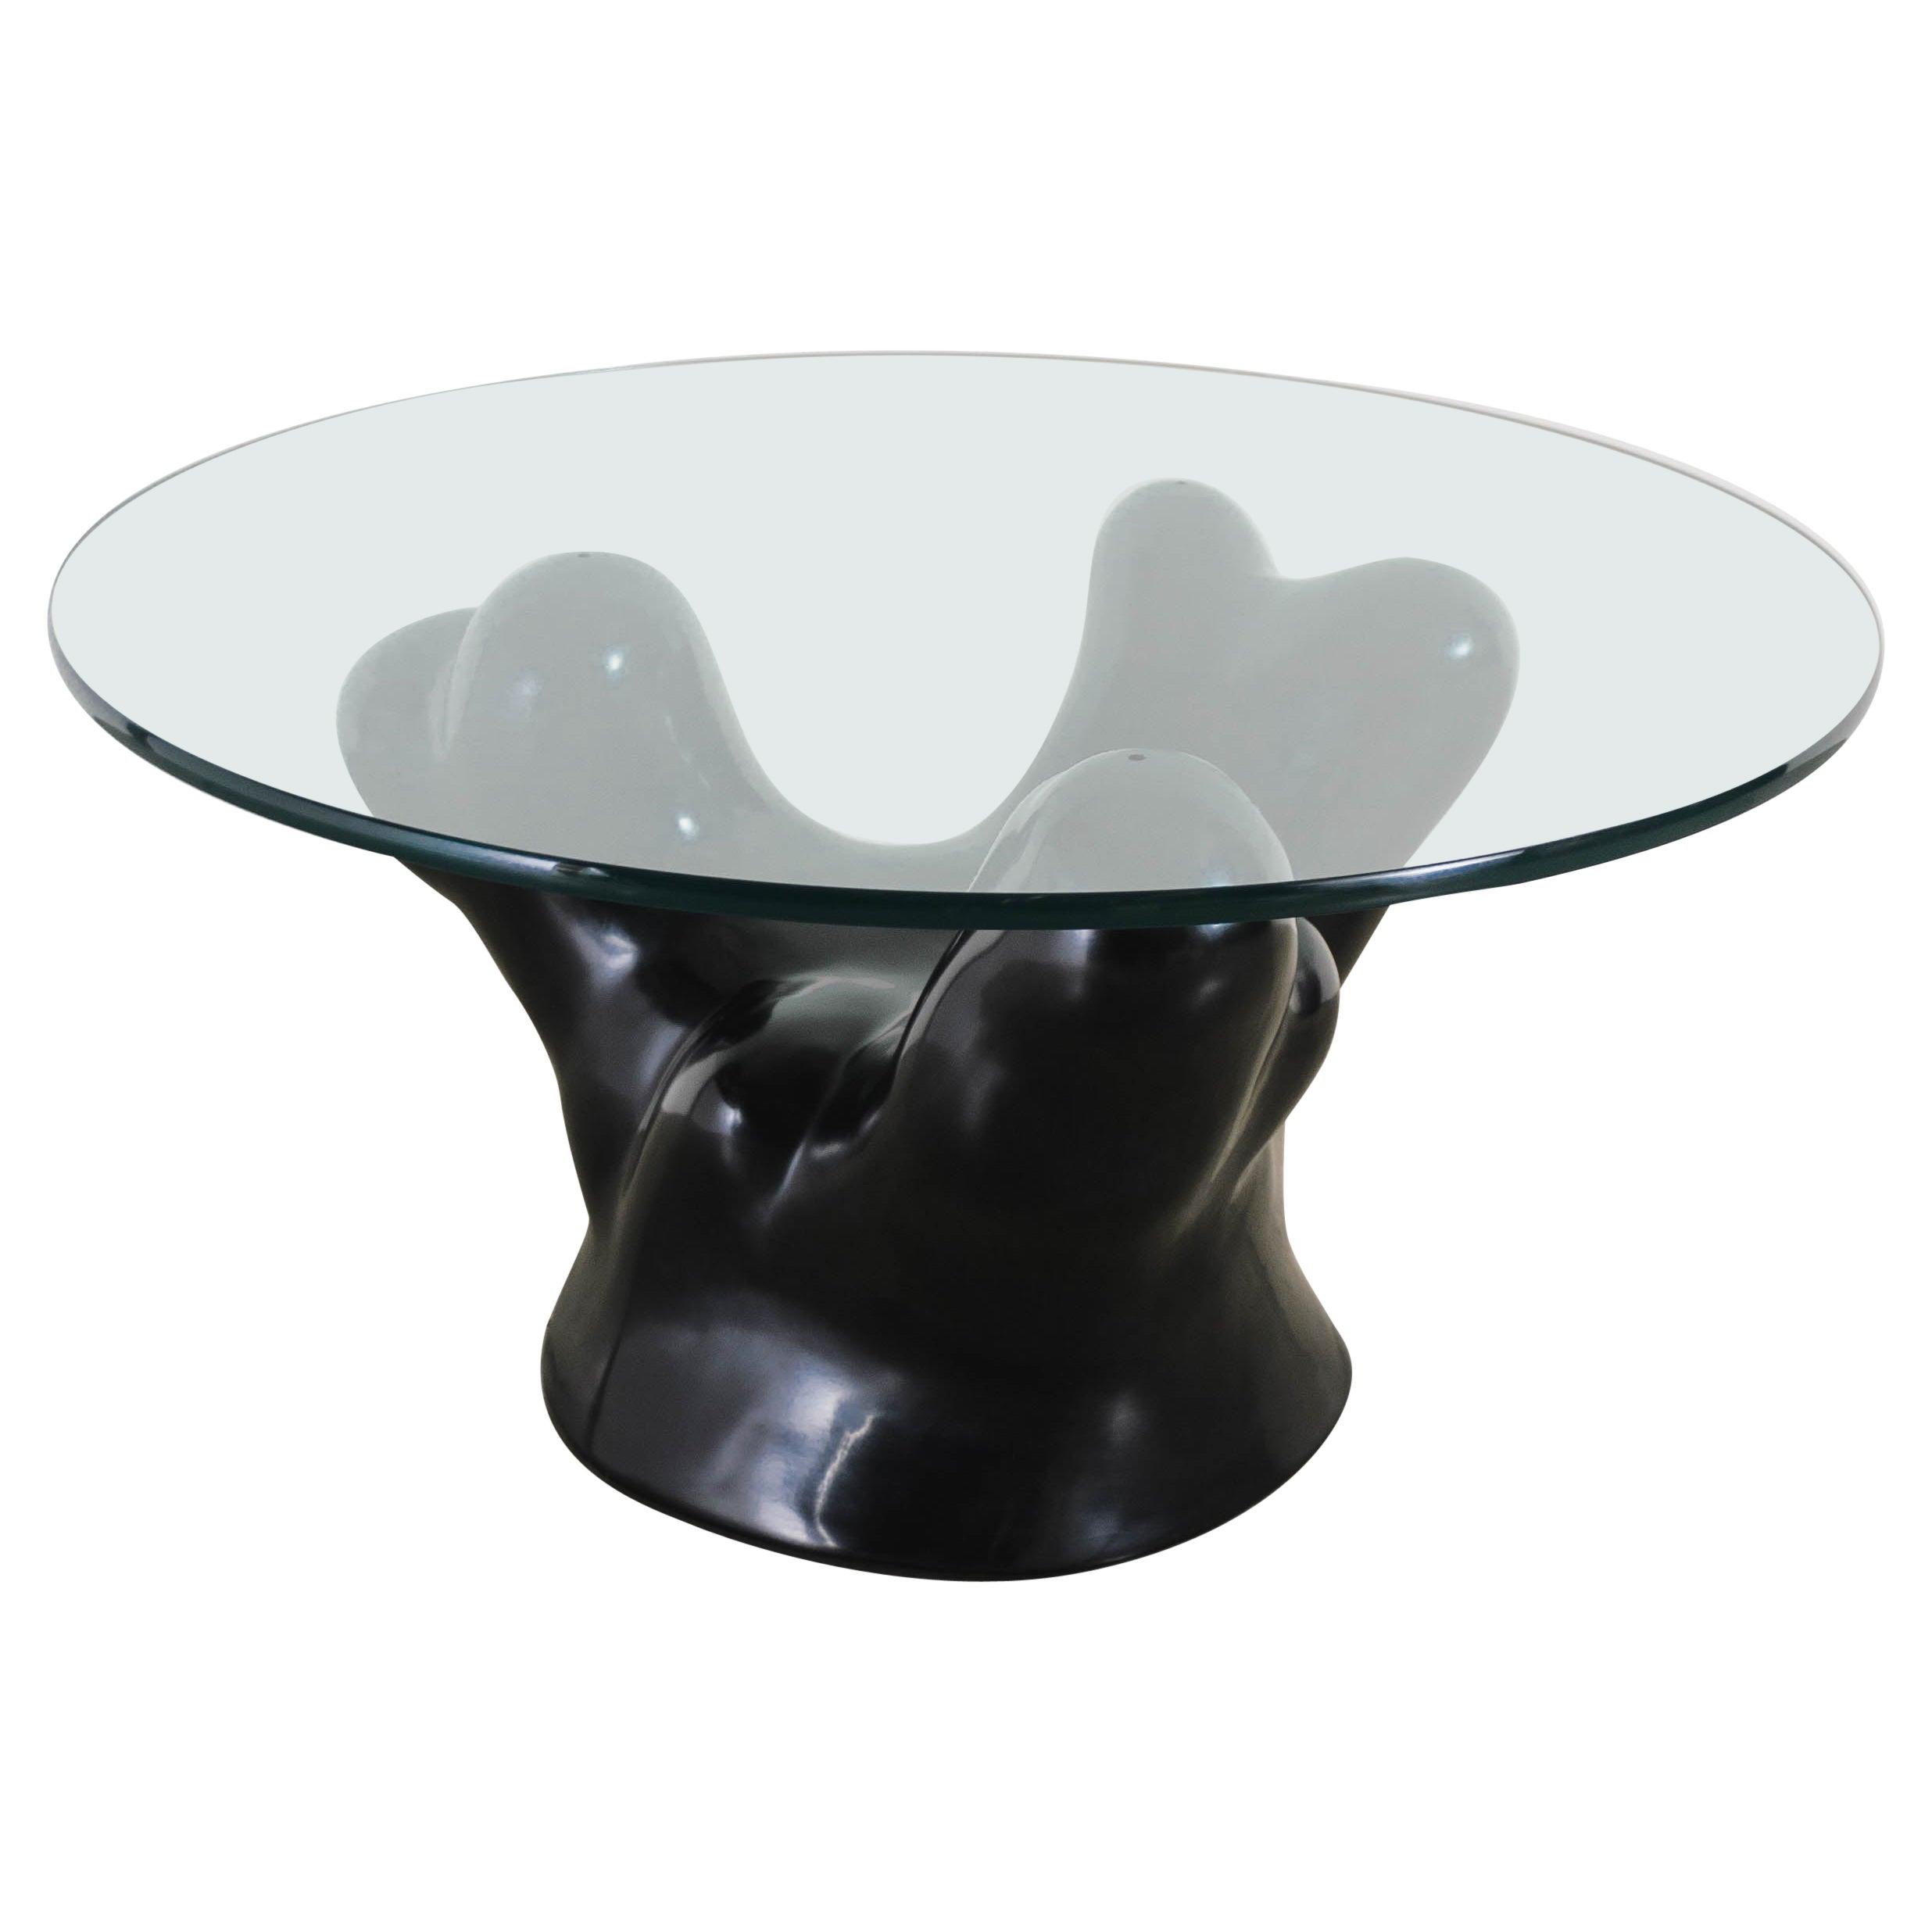 Contemporary Black Lacquer Coral Cocktail Table w/ Glass Top by Robert Kuo For Sale